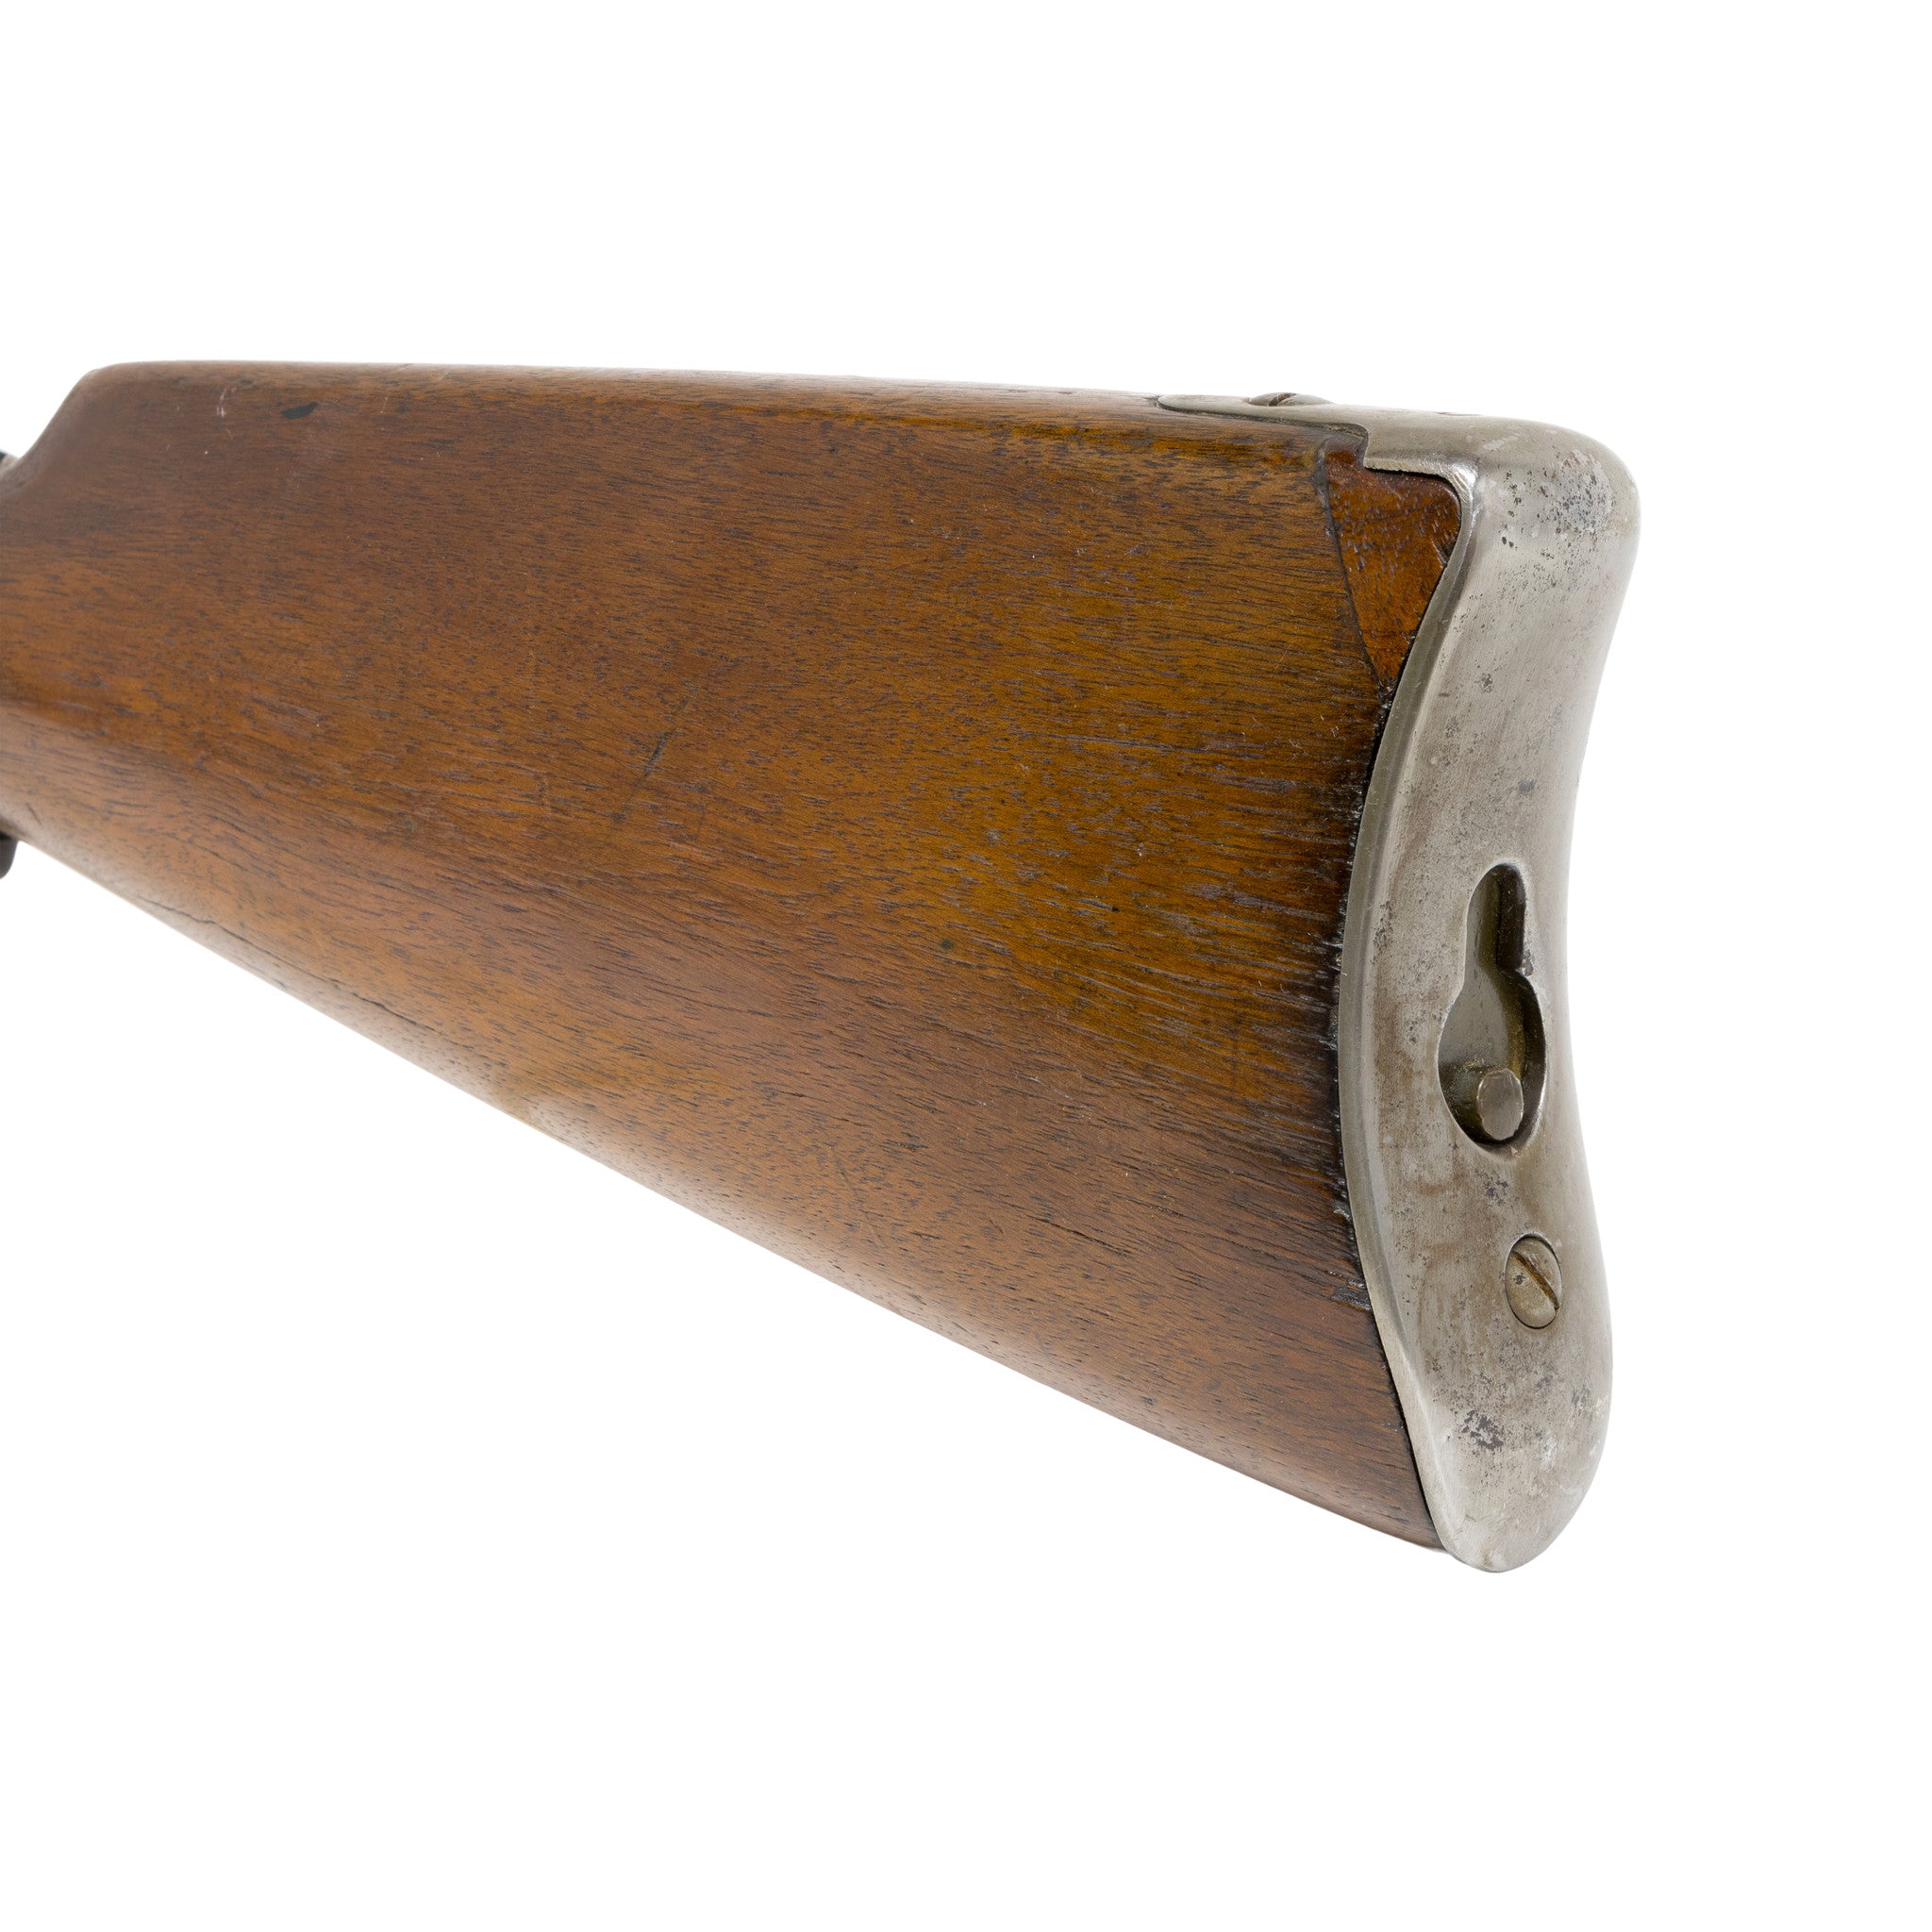 Winchester 1866 Saddle Ring Carbine